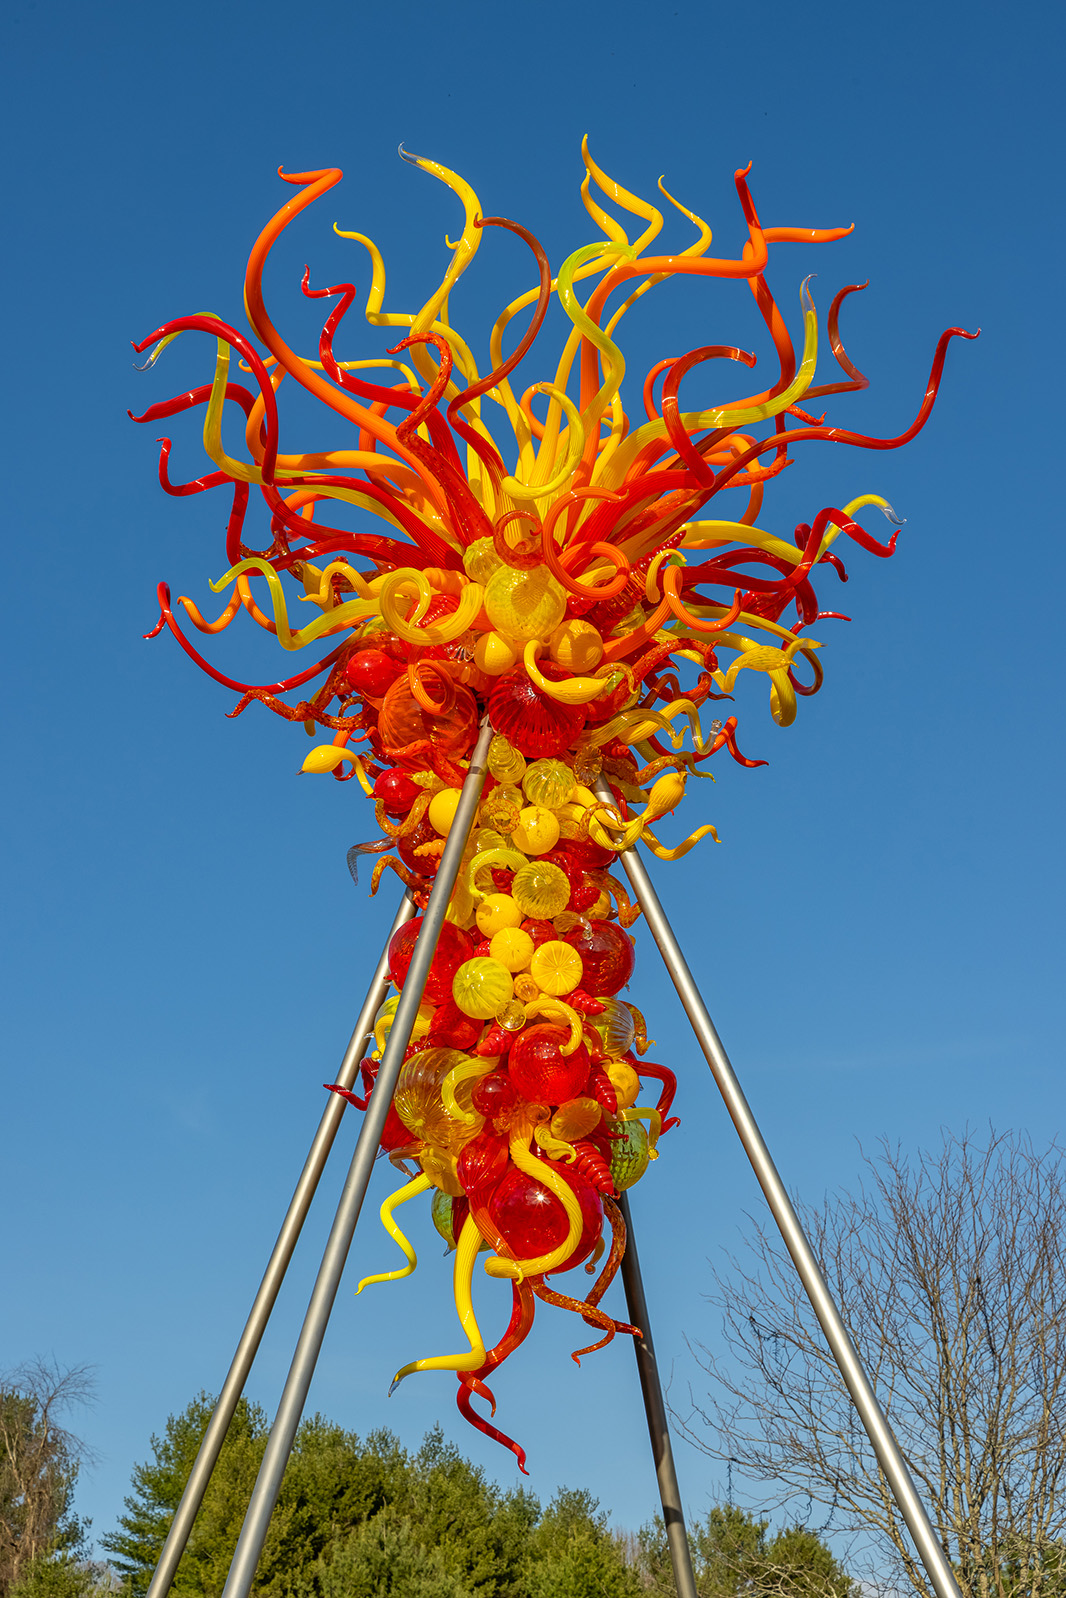 Dale Chihuly, Torchlight Chandelier, 2011